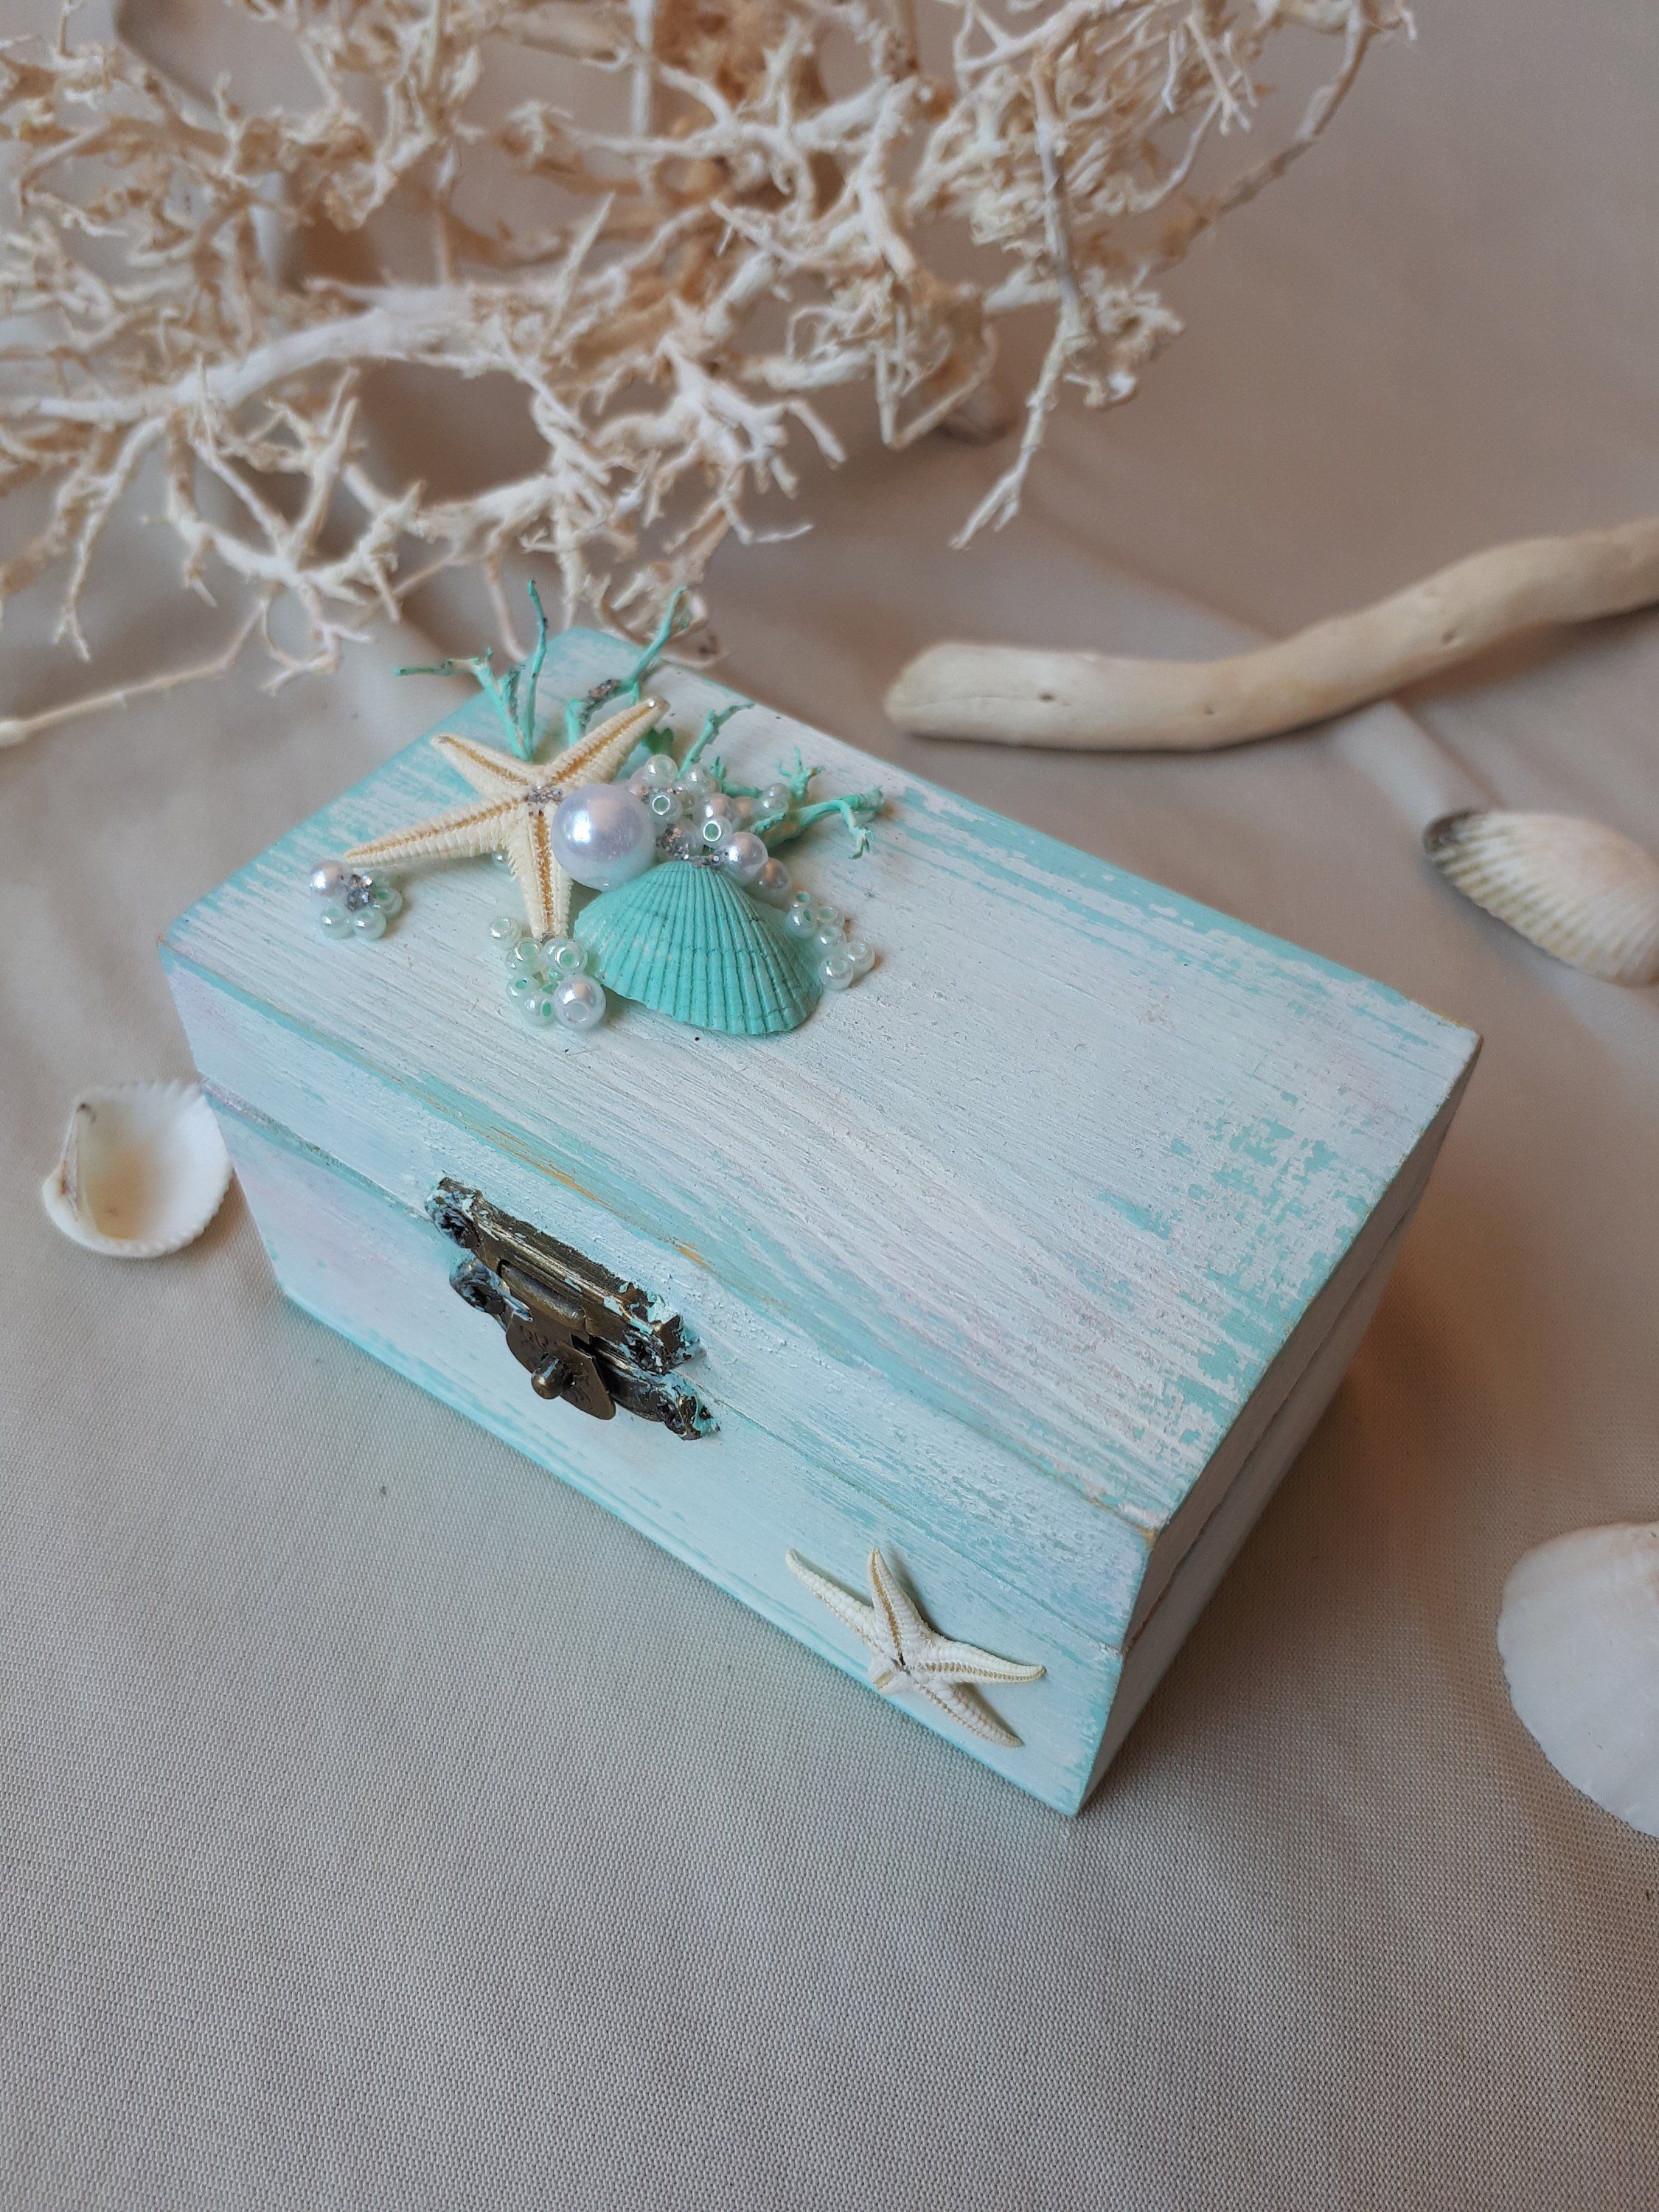 Personalized Wedding Ring Box Engagement Ring Holder Romantic Ring Bearer Beach Wedding Pillow Turquoise Ring Holder With Starfish & Shells - Personalized Wedding Ring Box Engagement Ring Holder Romantic Ring Bearer Beach Wedding Pillow Turquoise Ring Holder With Starfish & Shells -   19 diy Box painting ideas